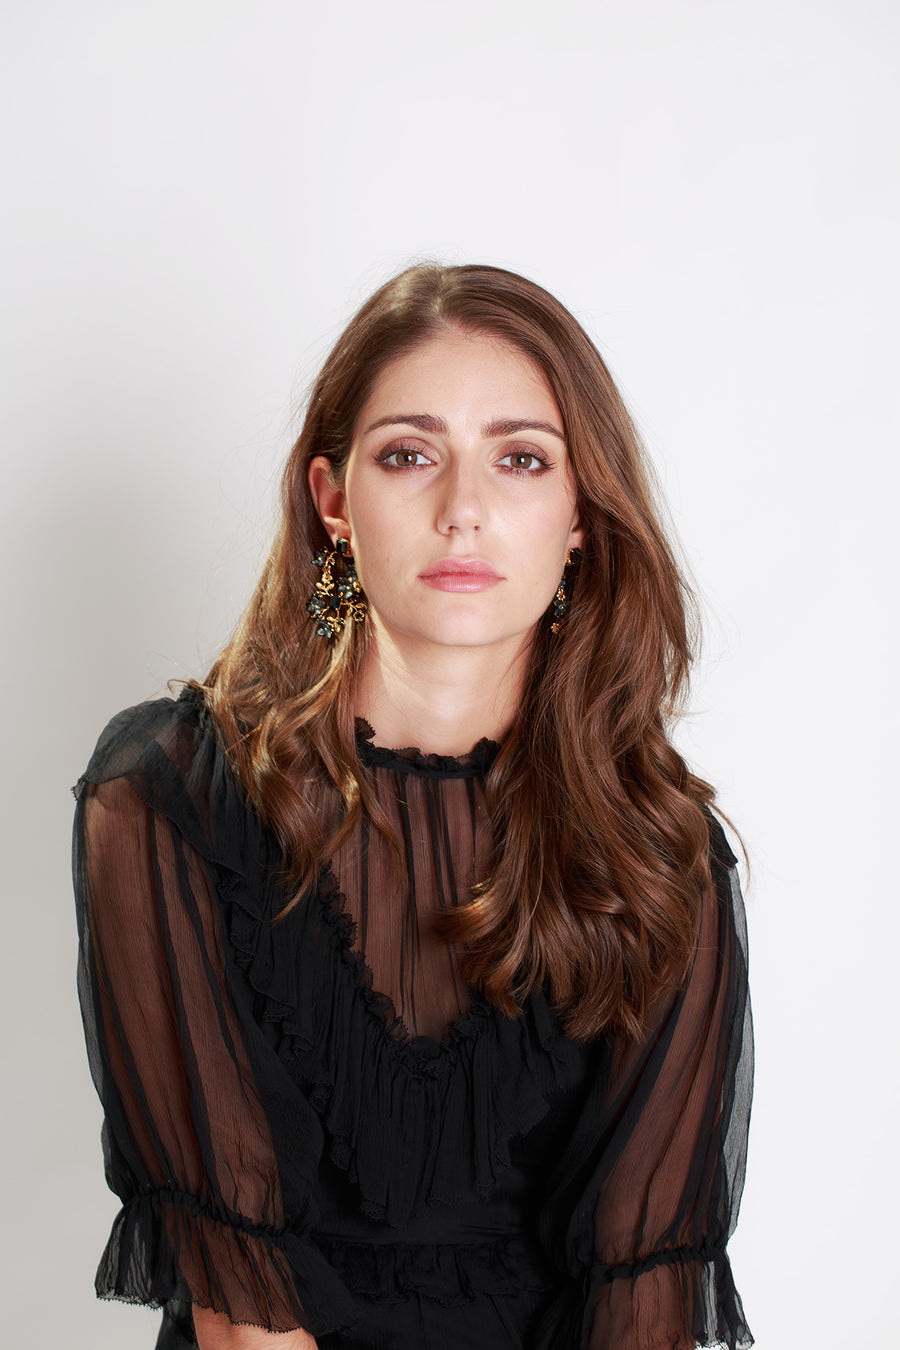 Black and gold statement earrings with crystals and flowers